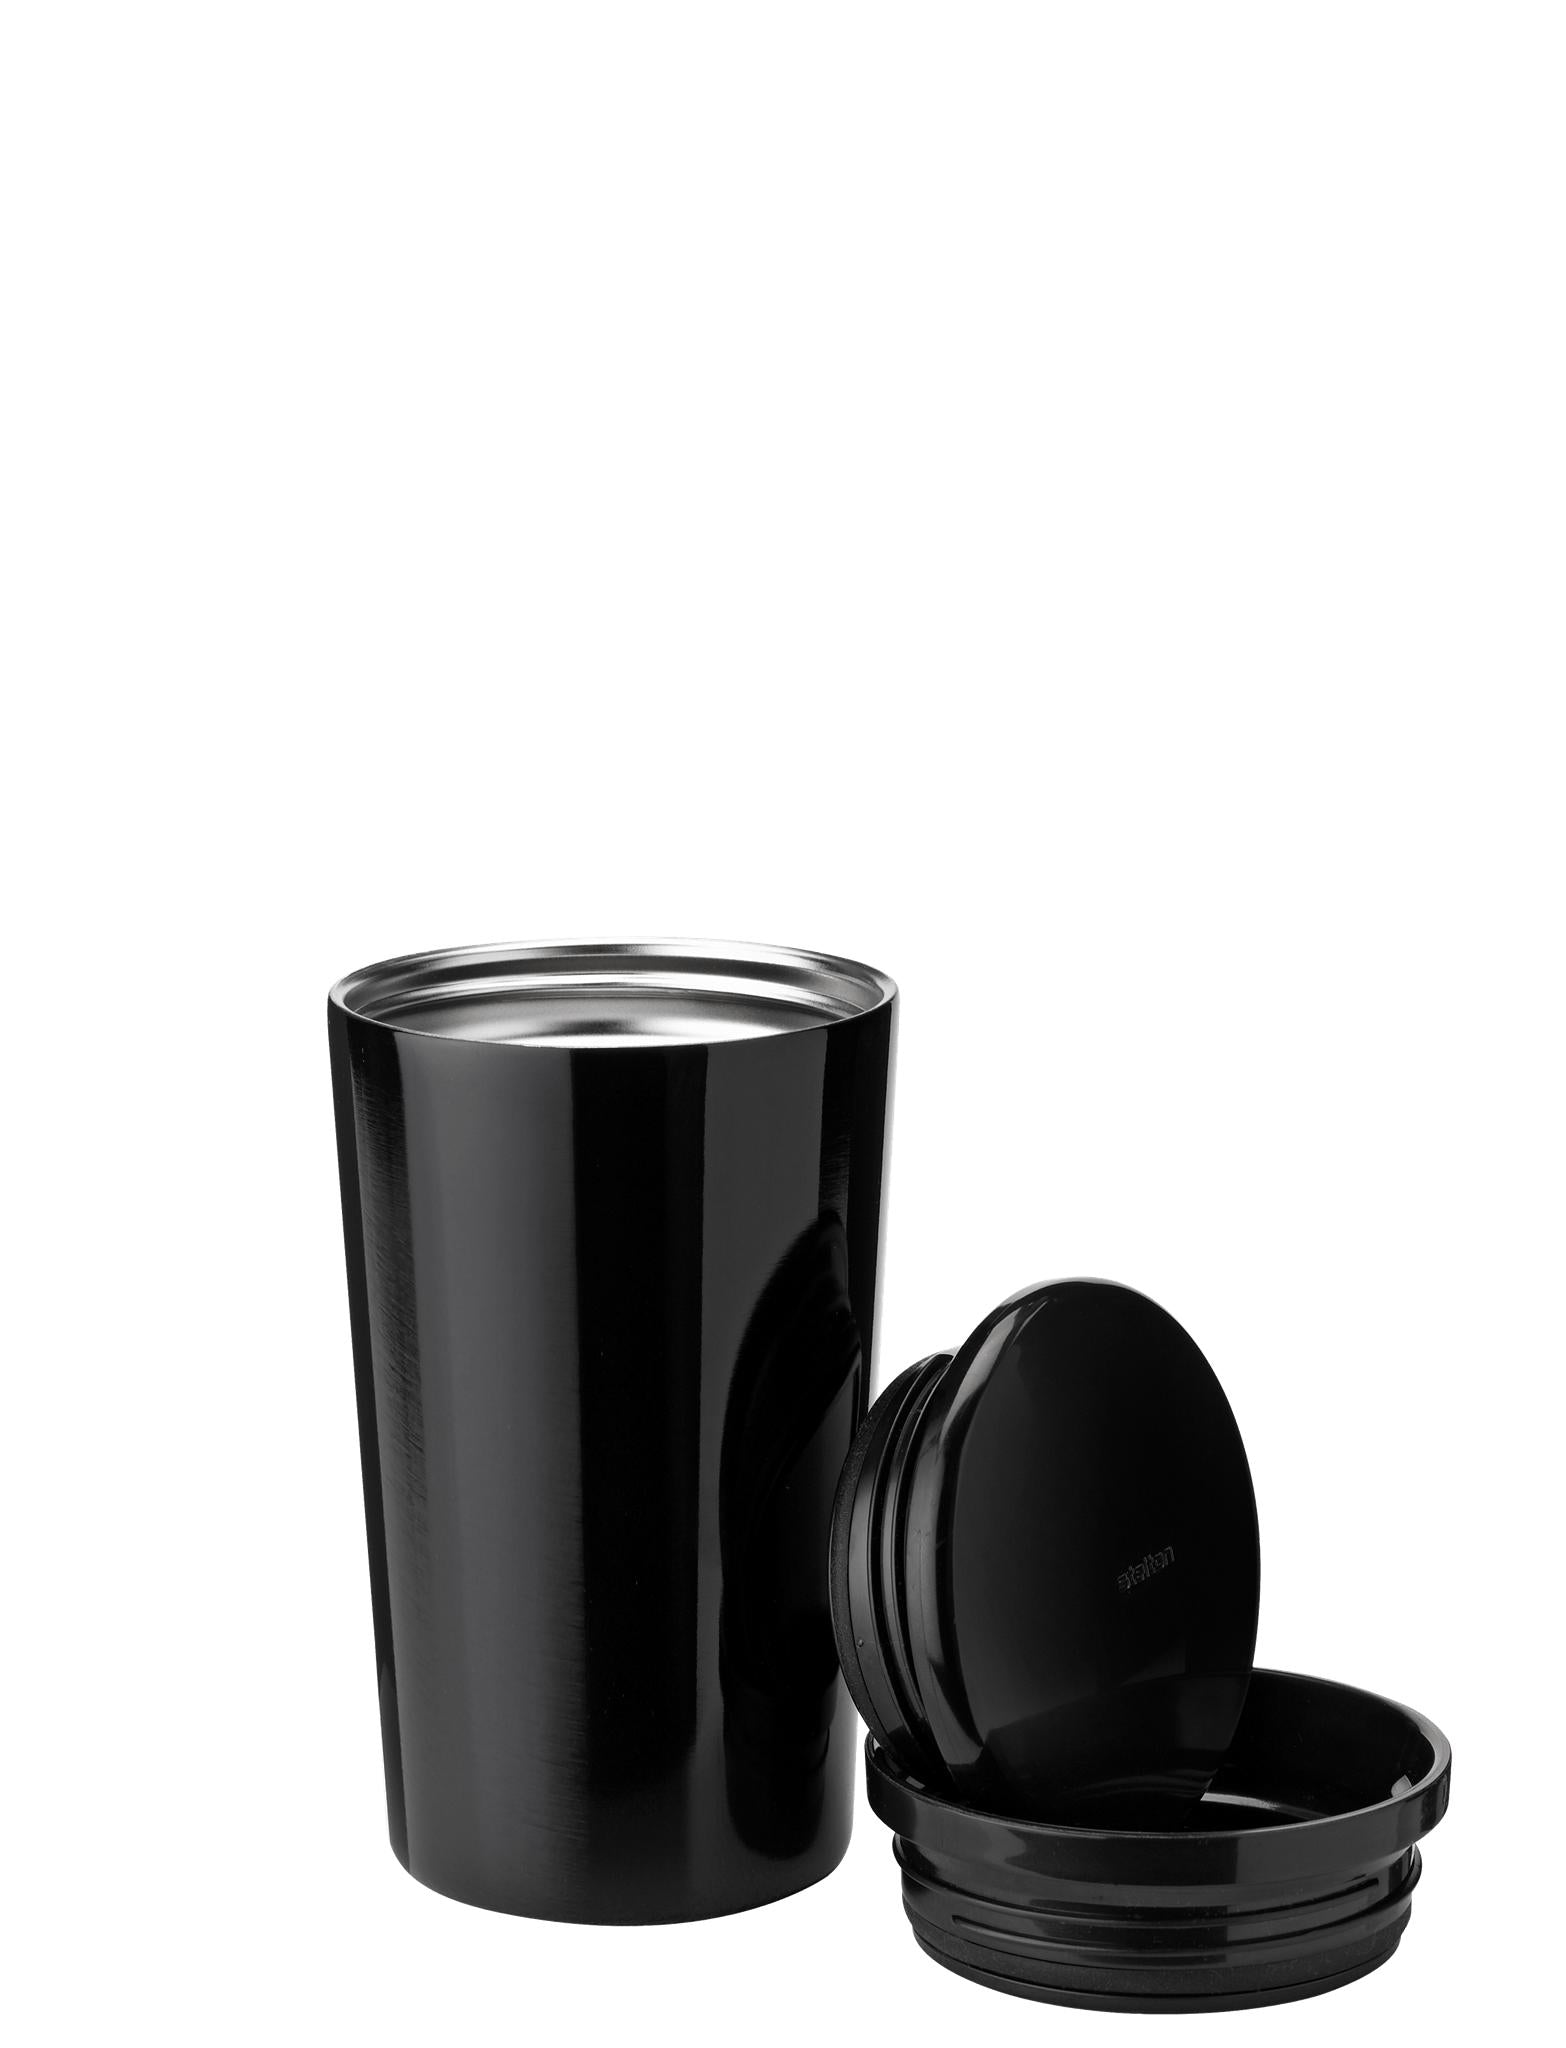 Stelton Carrie Thermo Mug 0,4 L, sort